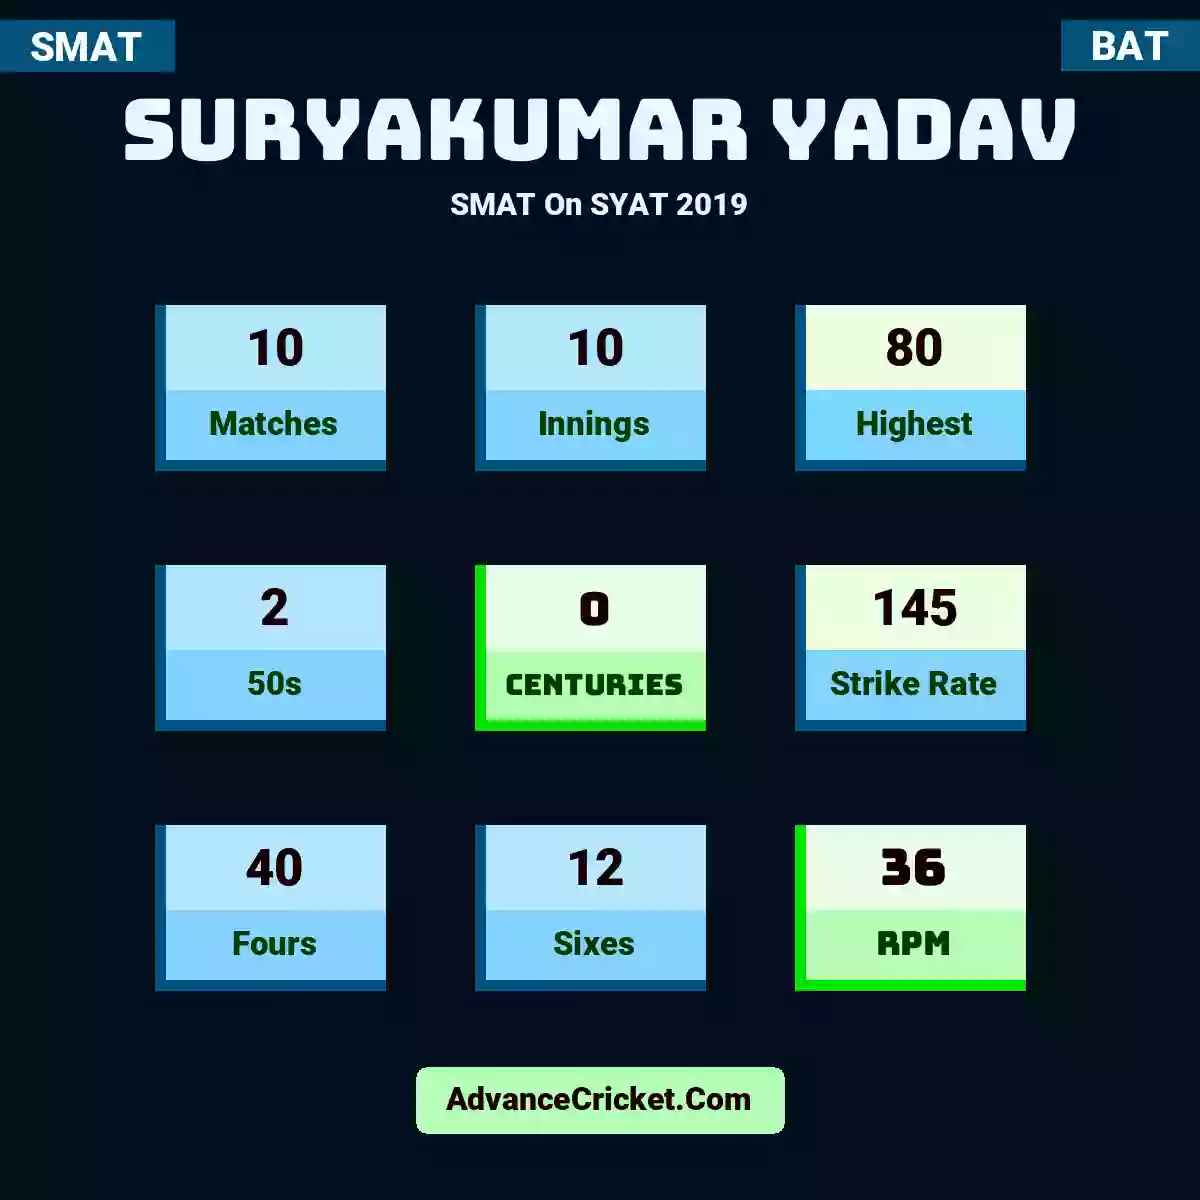 Suryakumar Yadav SMAT  On SYAT 2019, Suryakumar Yadav played 10 matches, scored 80 runs as highest, 2 half-centuries, and 0 centuries, with a strike rate of 145. S.Yadav hit 40 fours and 12 sixes, with an RPM of 36.